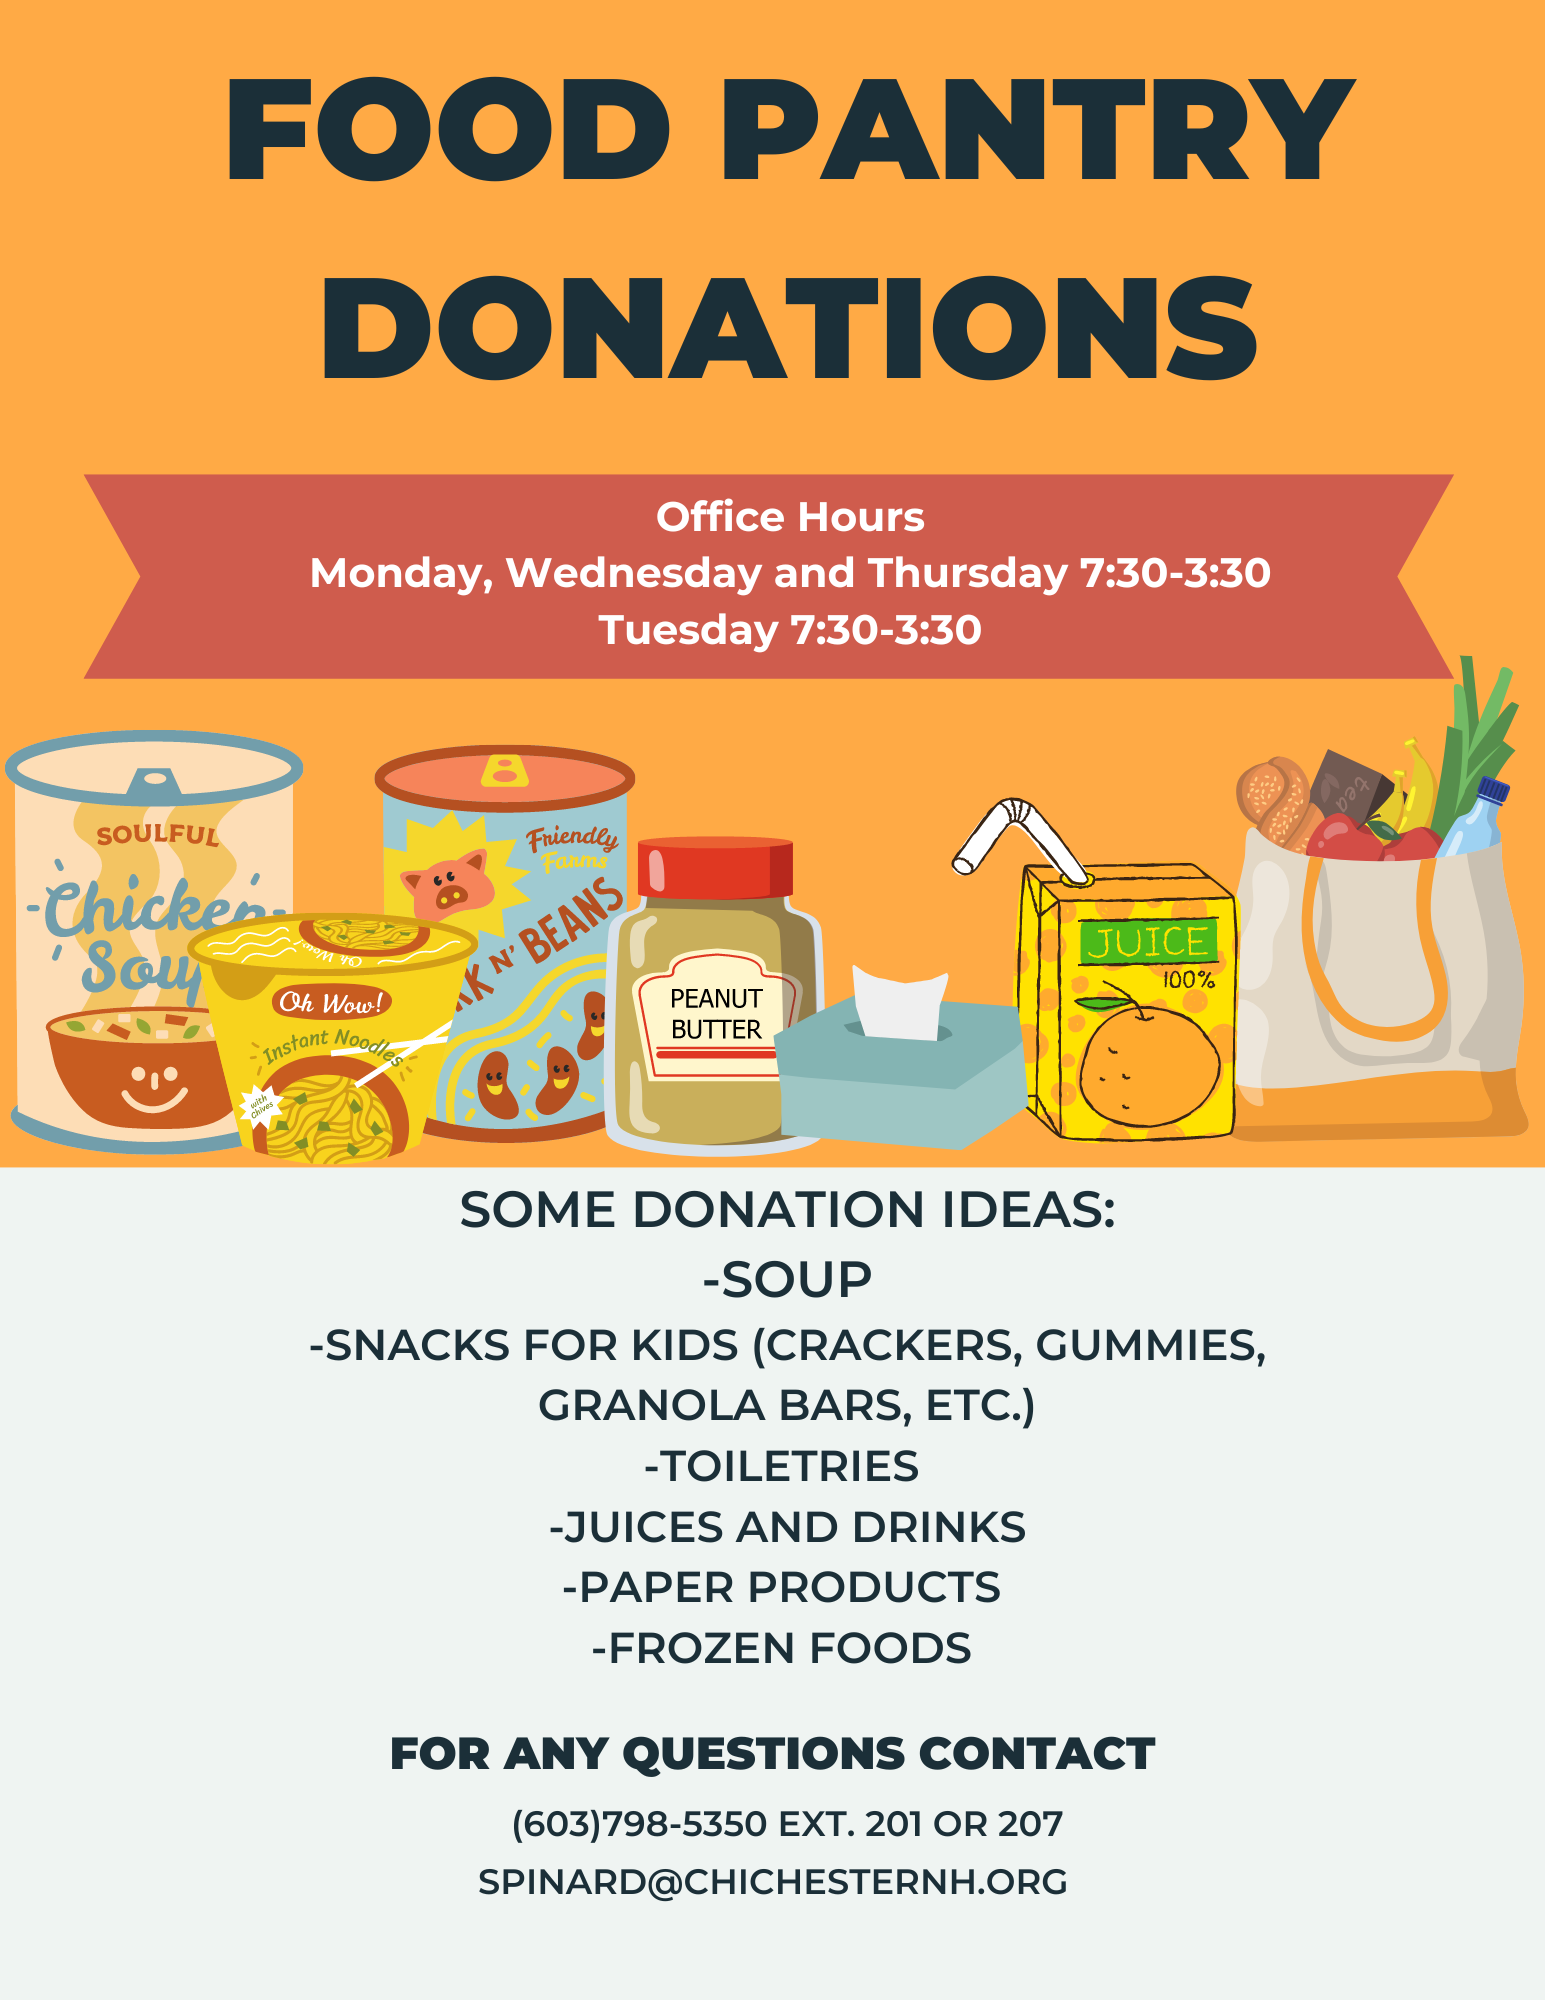 Food Pantry Donations, What to Donate and The times we are open